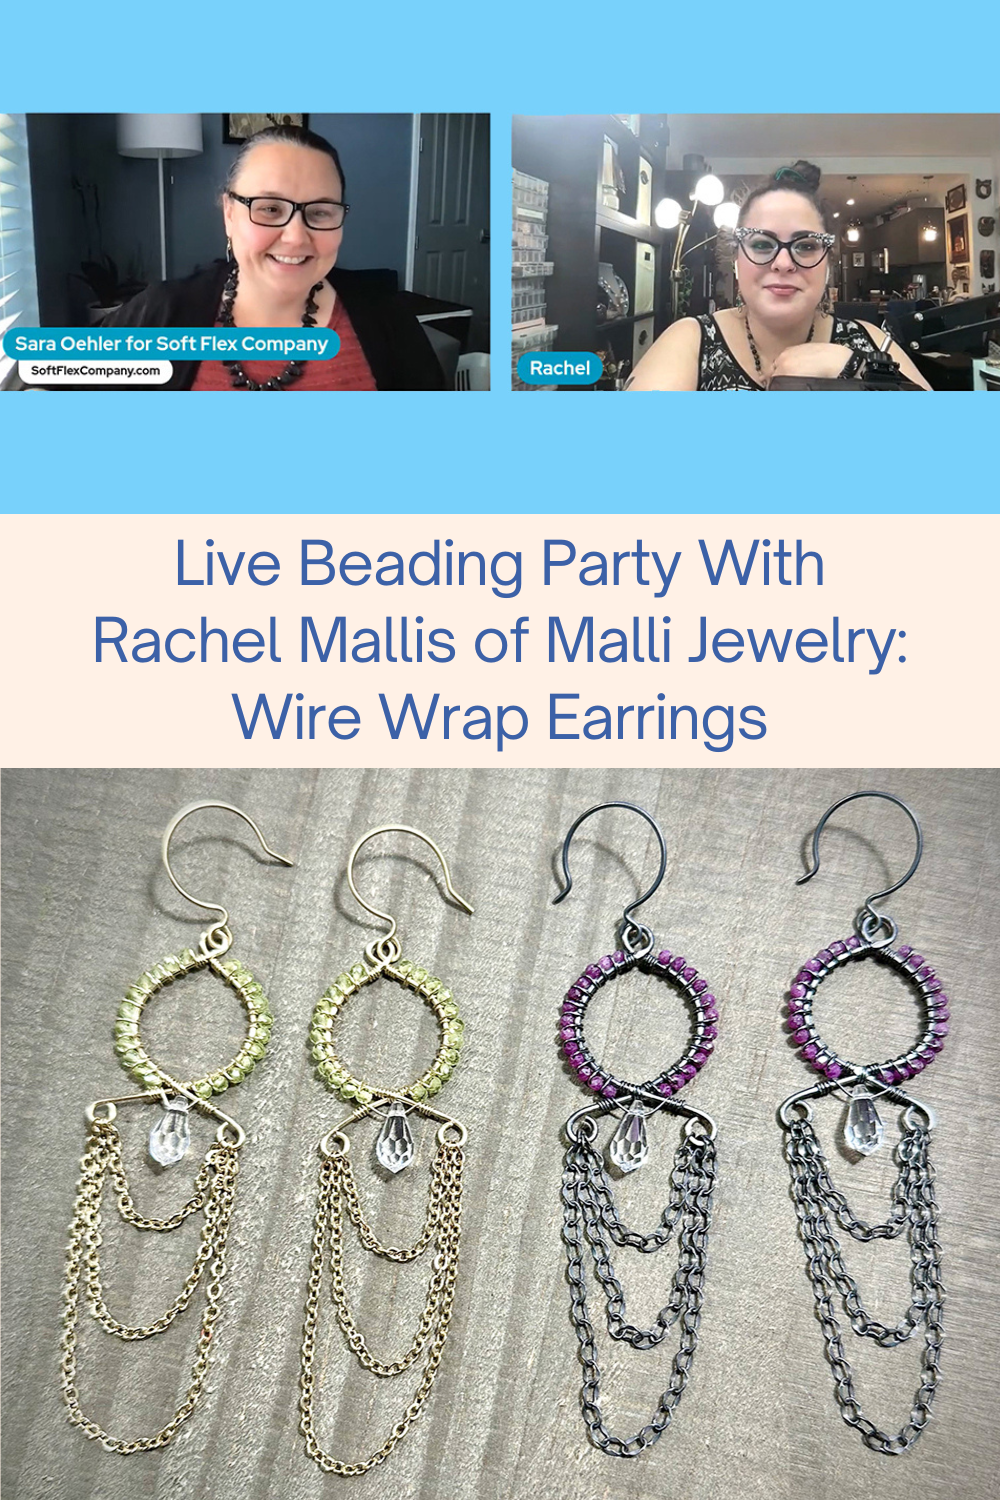 Live Beading Party With Rachel Mallis of Malli Jewelry Wire Wrap Earrings Collage